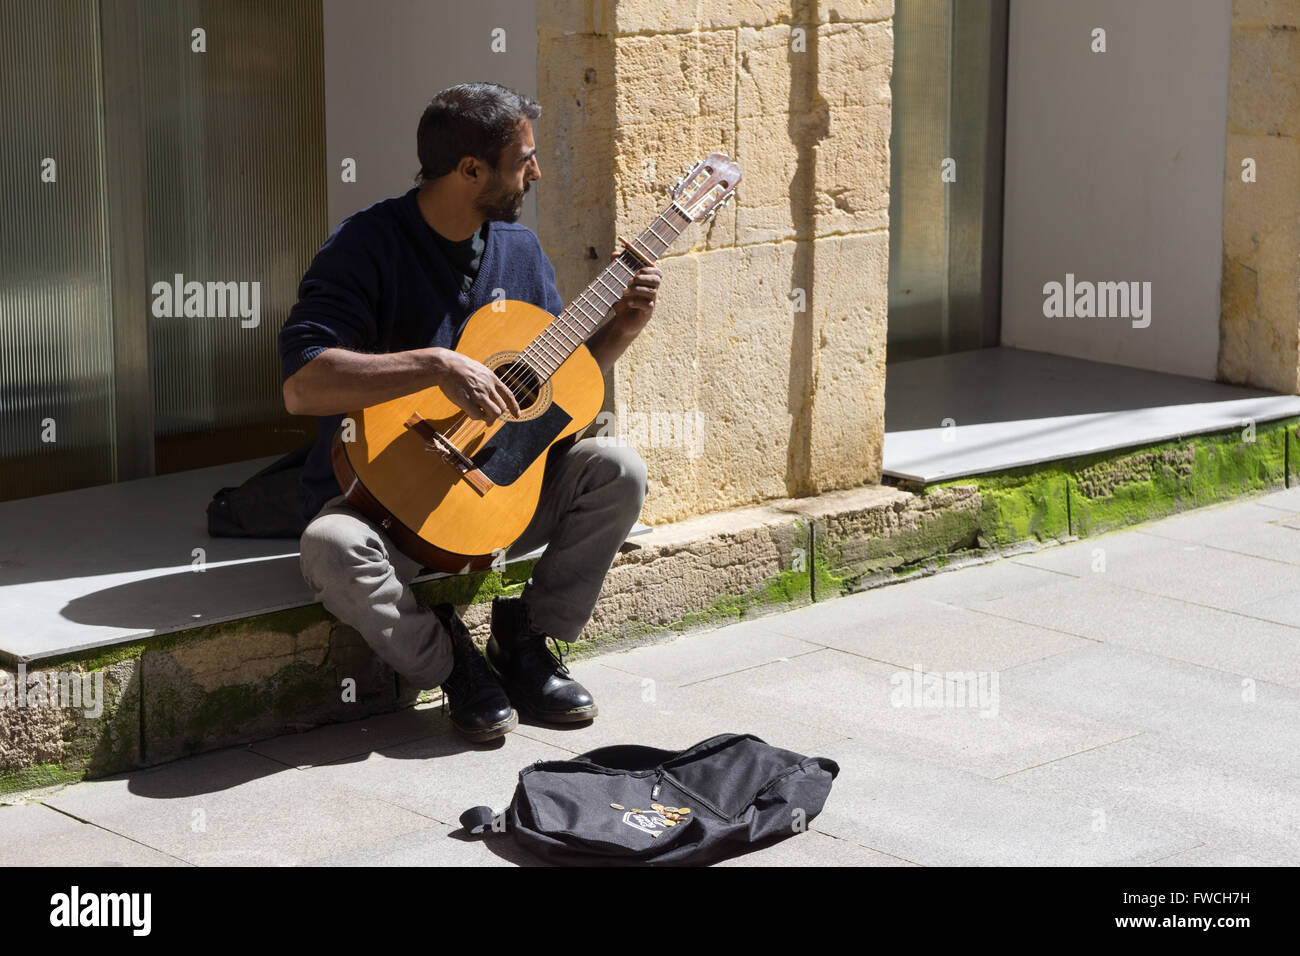 Spanish guitar player busking in the street Stock Photo - Alamy